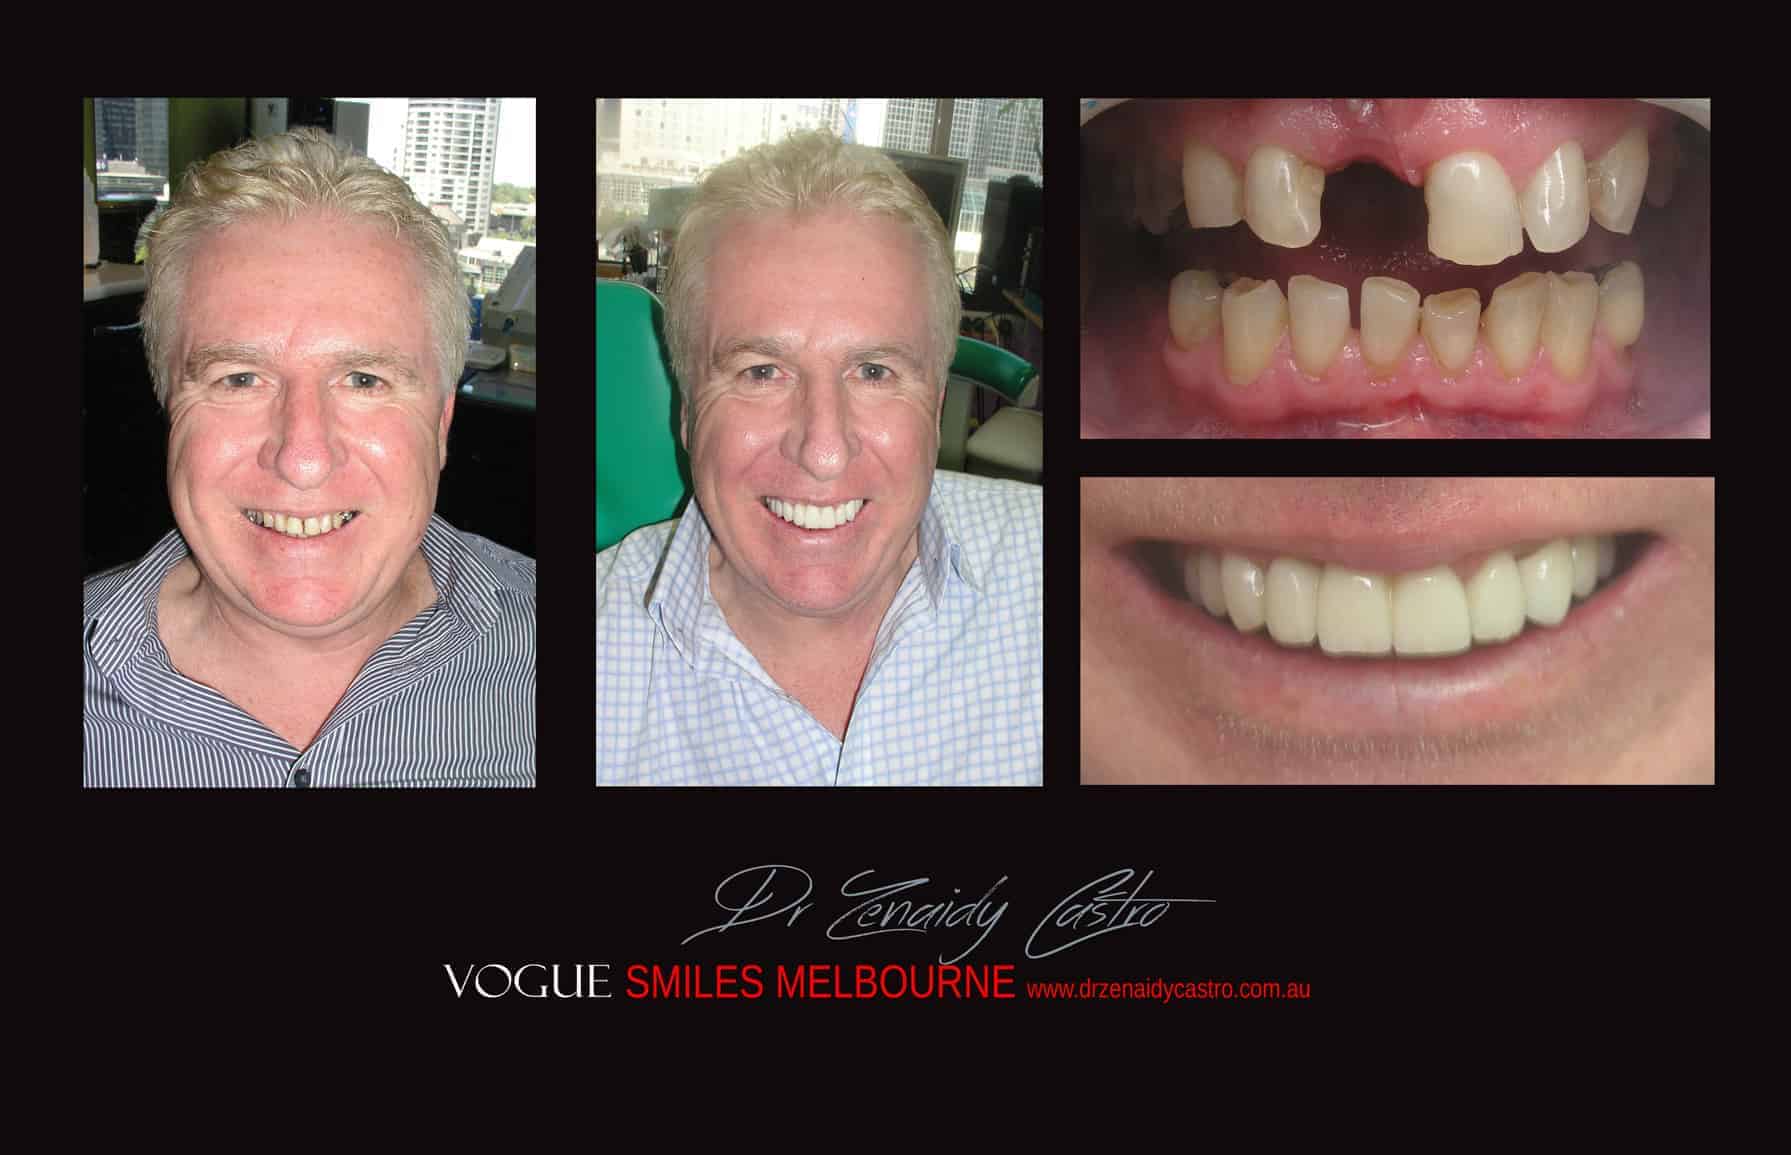 Full Mouth Reconstruction Melbourne